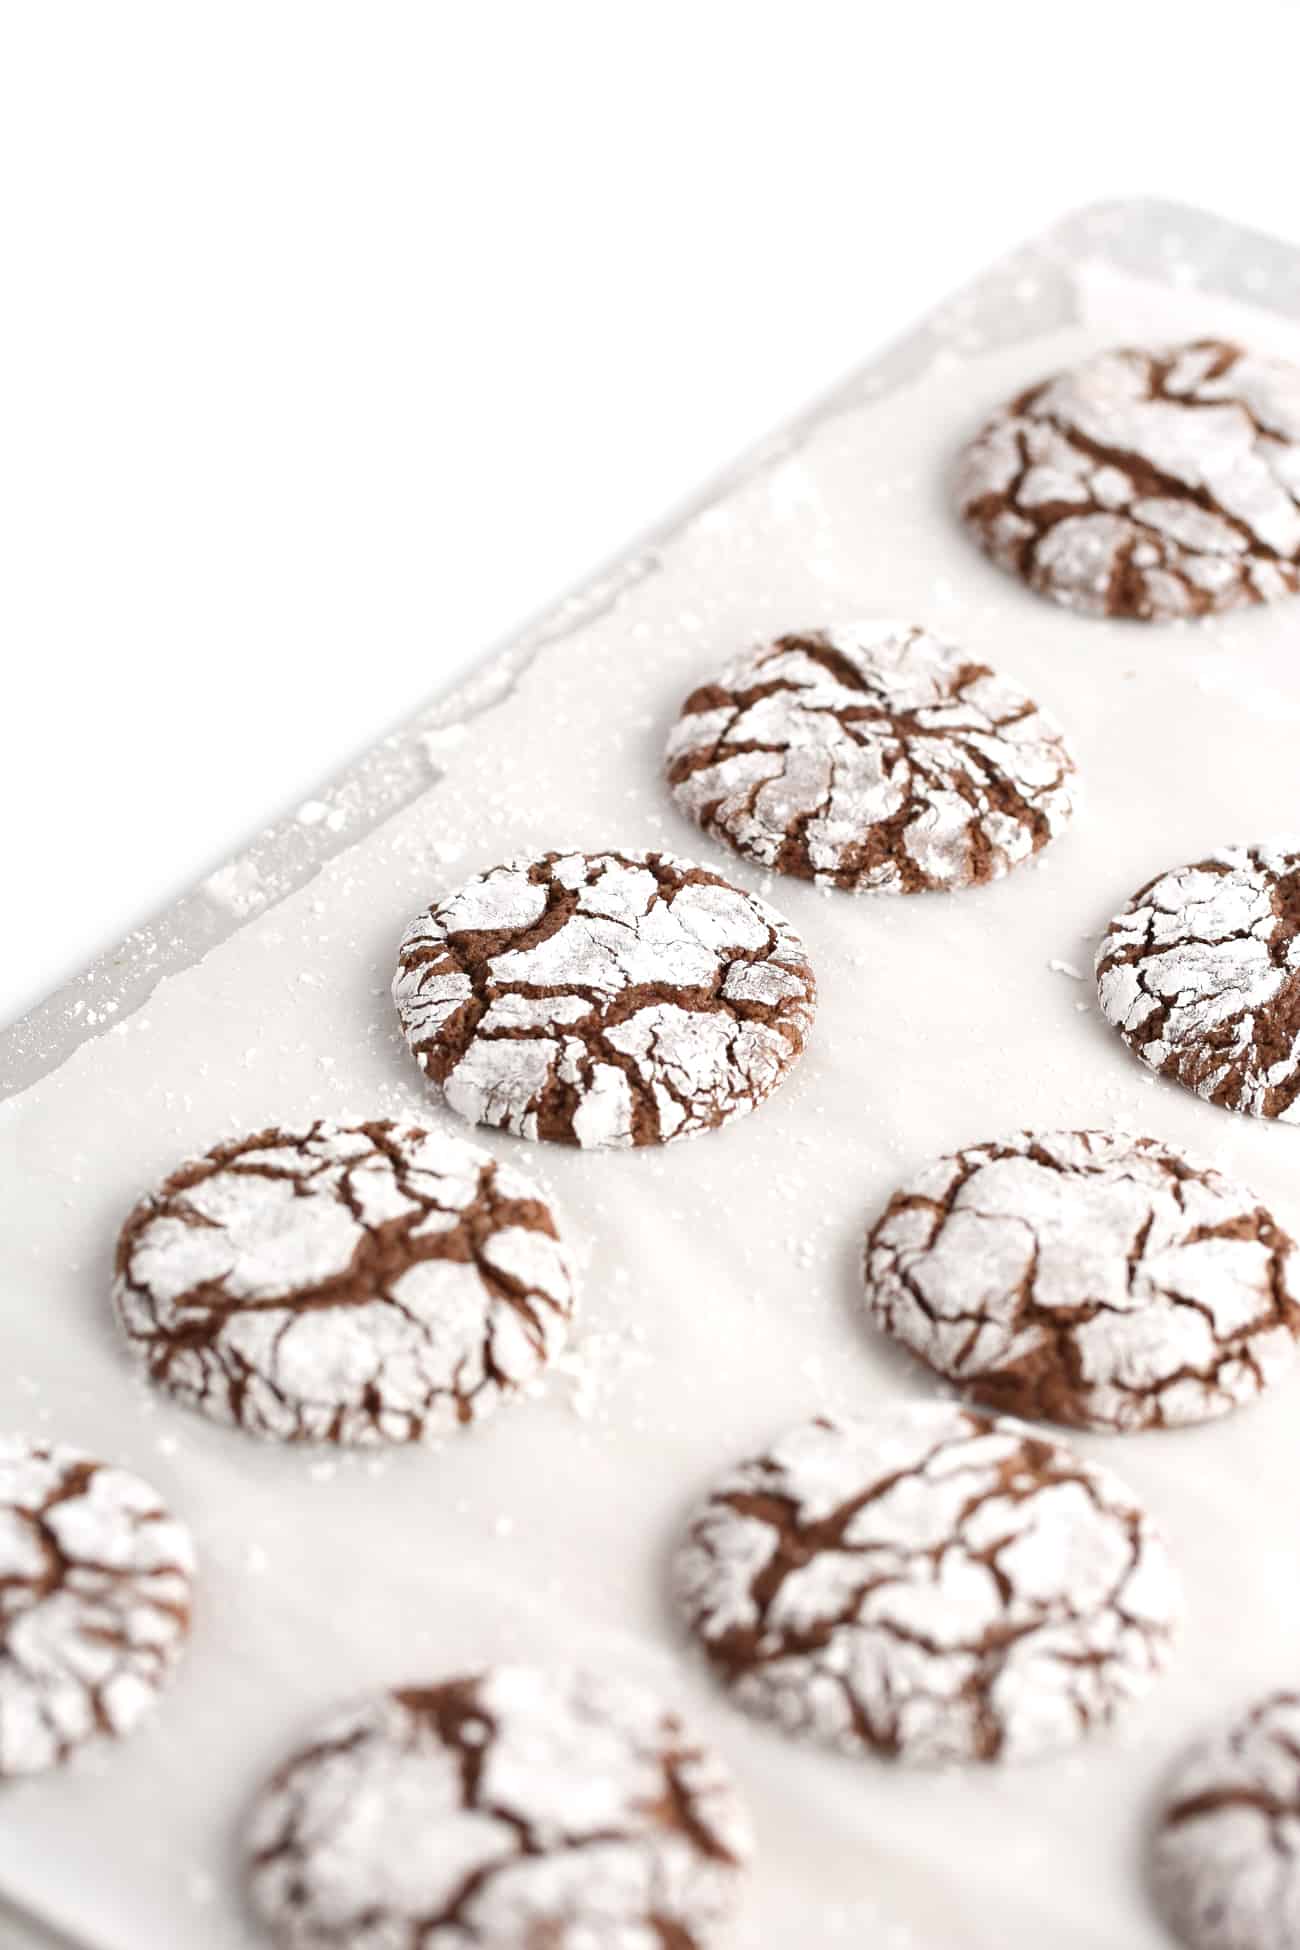 Make these easy fudgy chocolate brownie cookies for the perfect addition to your holiday cookie trays. Using Bisquick pancake mix to make them super soft and a boxed brownie mix to make them super fudgy, these cookies pack in the softness and flavor without tons of work.